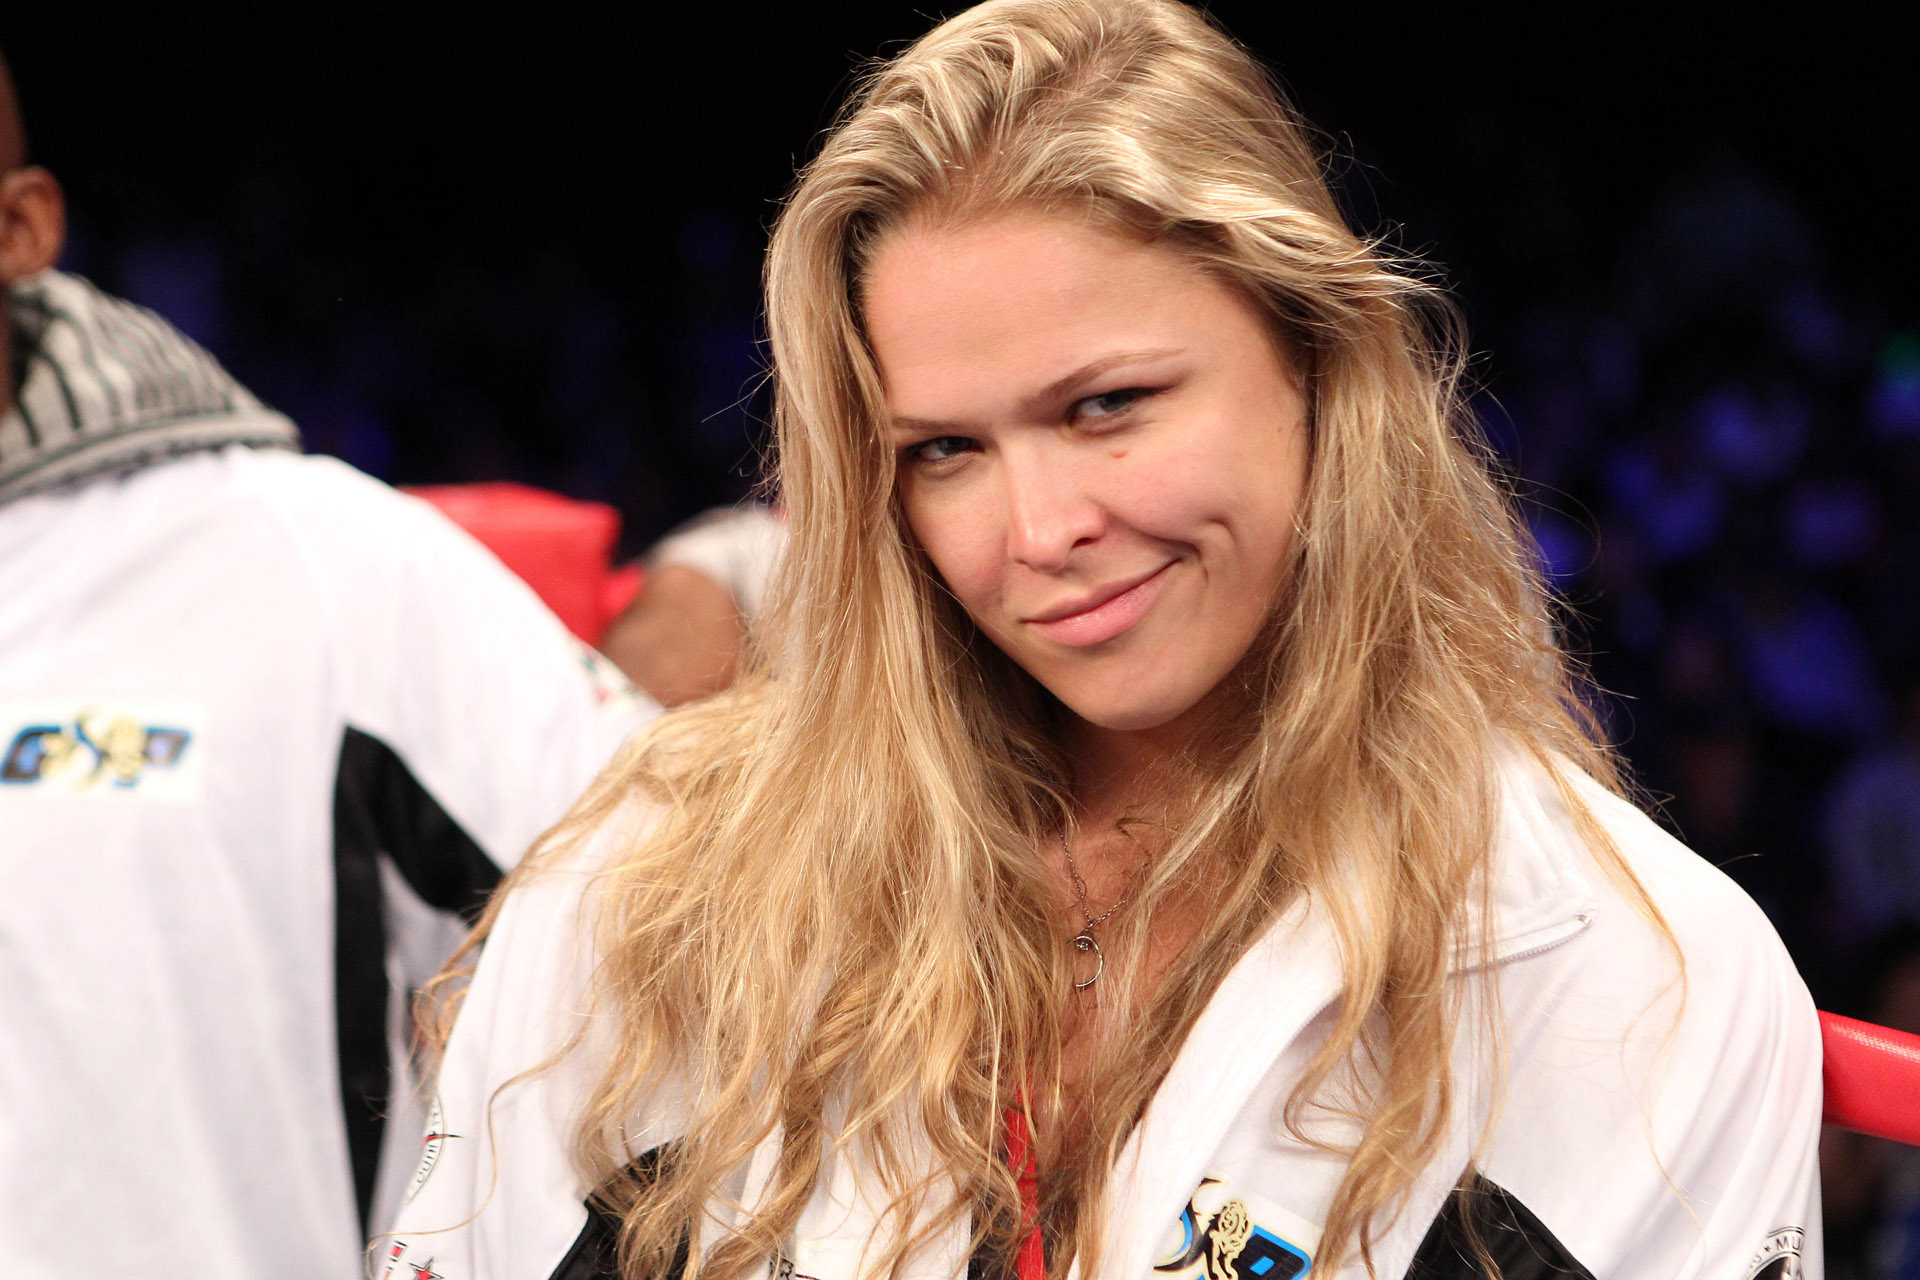 Ronda Rousey Hd Wallpapers For Desktop Download , HD Wallpaper & Backgrounds